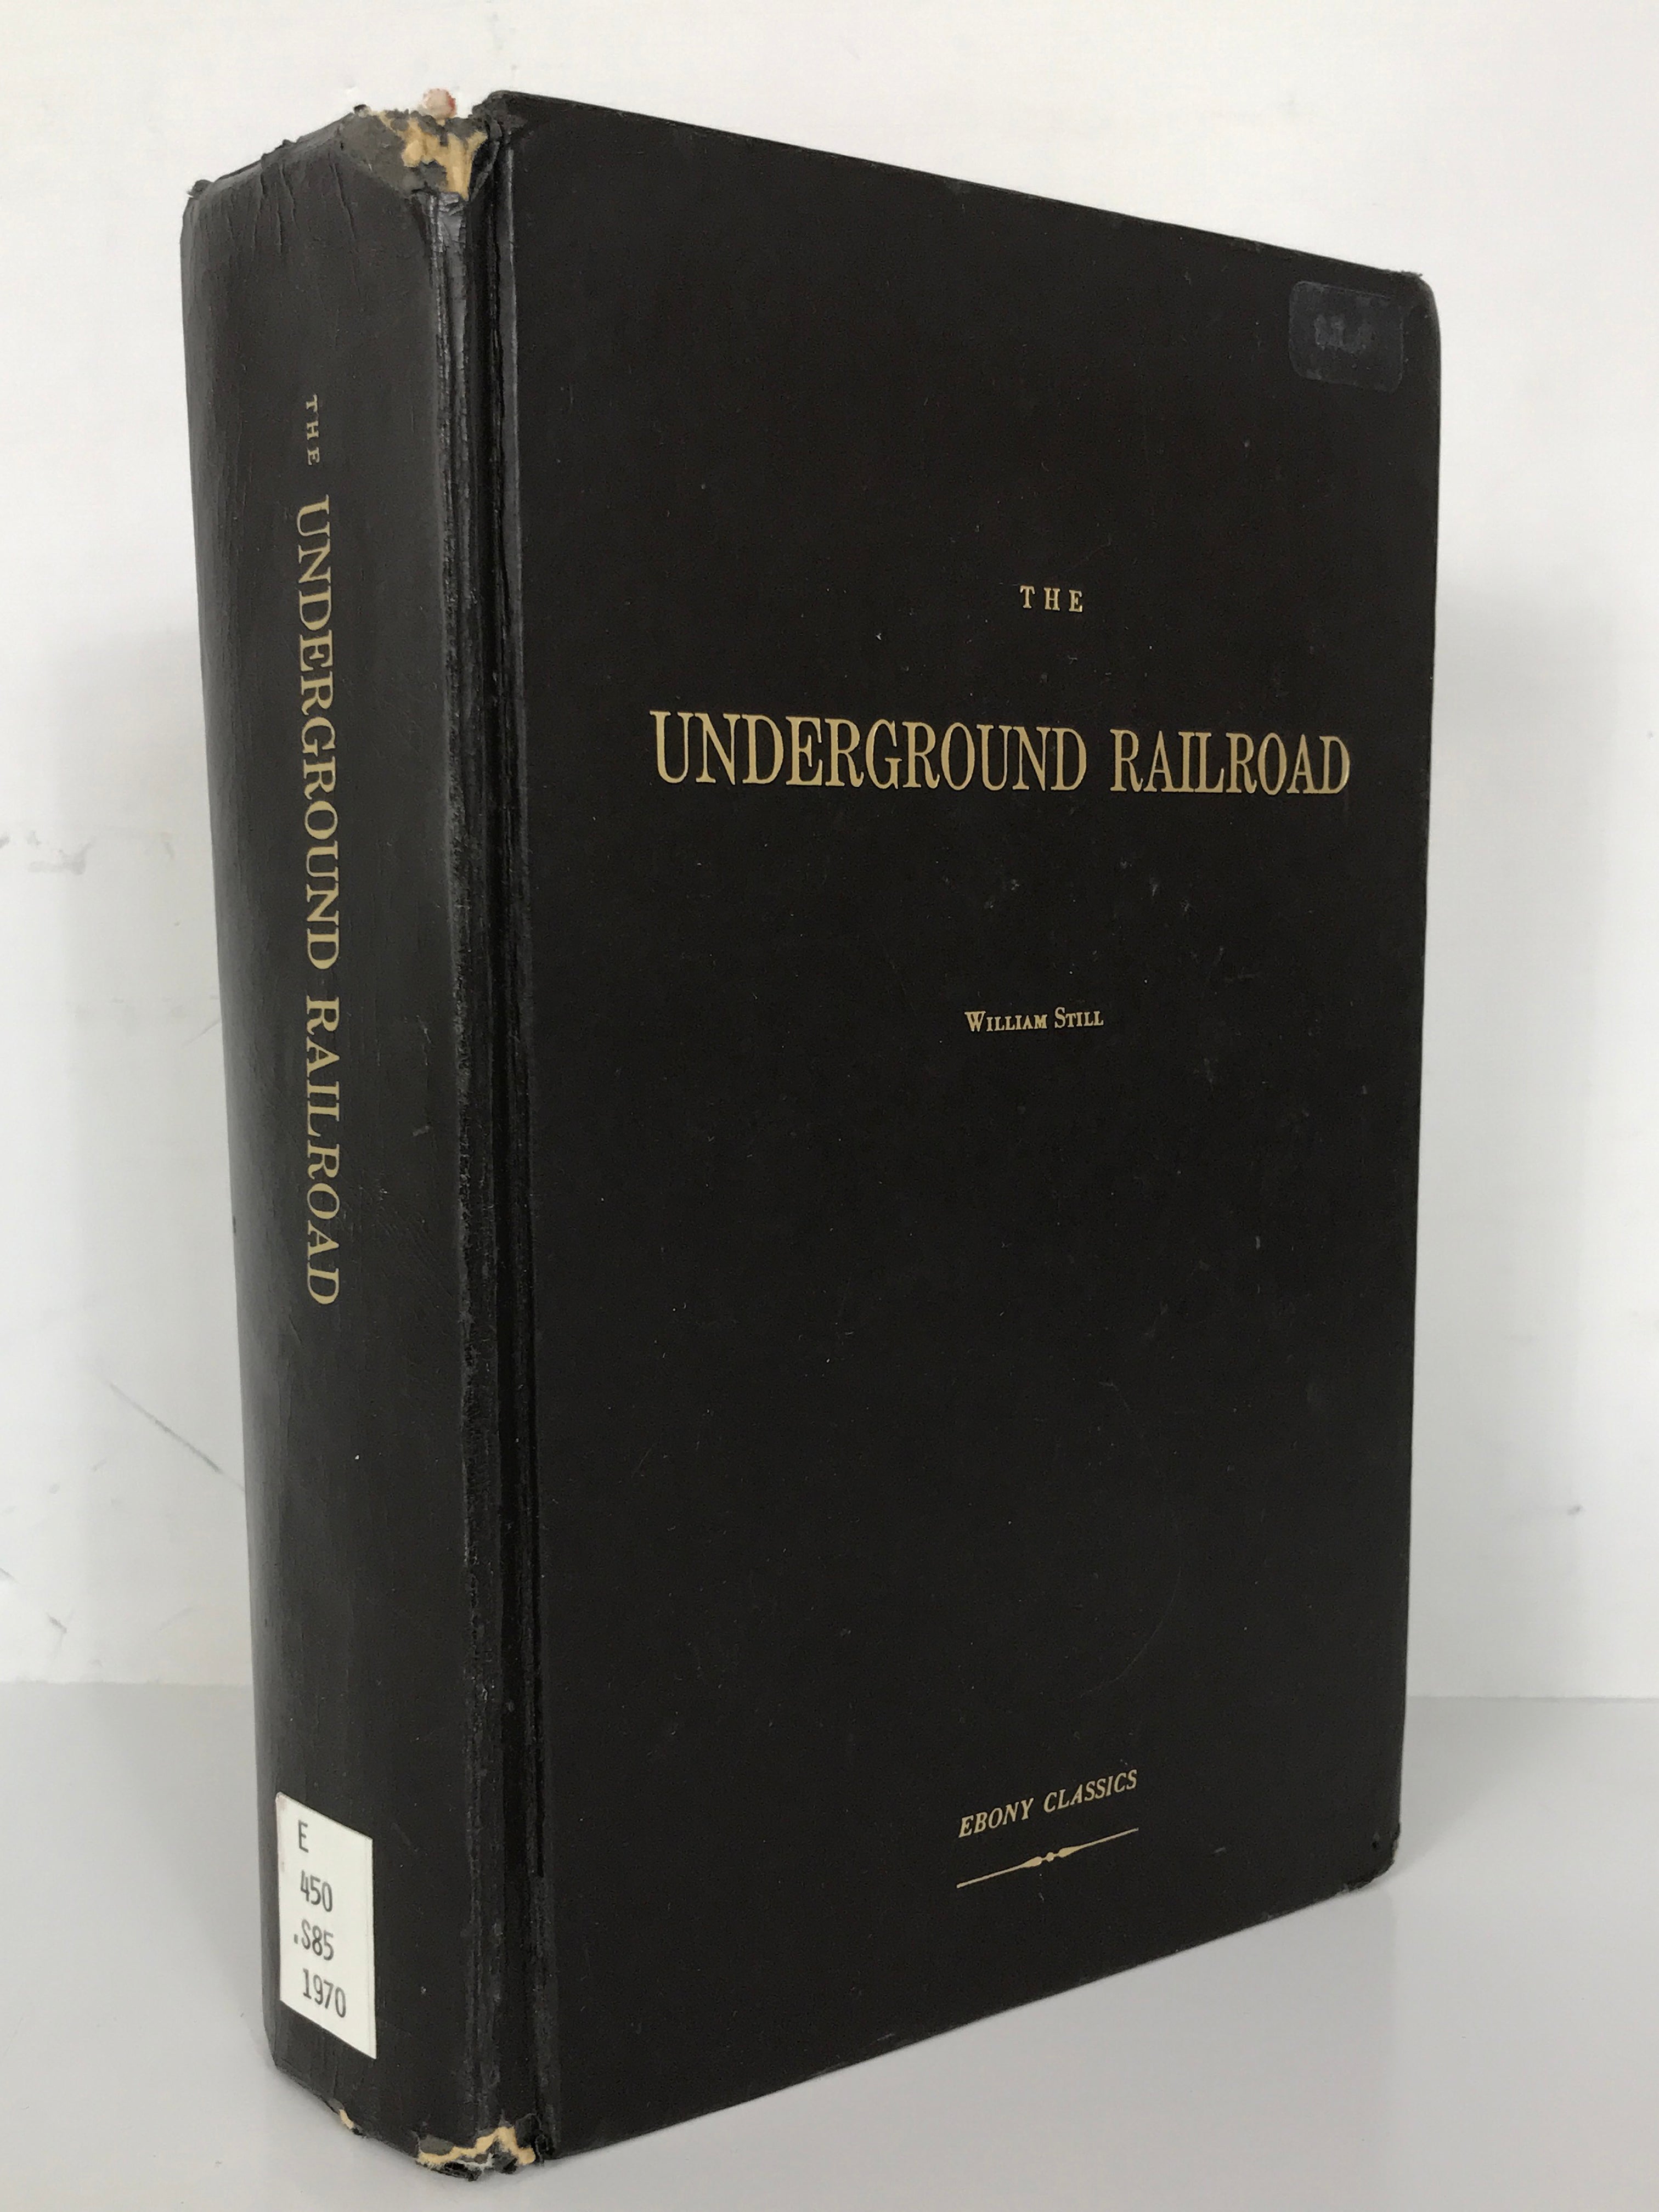 The Underground Railroad by William Still (1970 Reprint) HC Former Library Copy